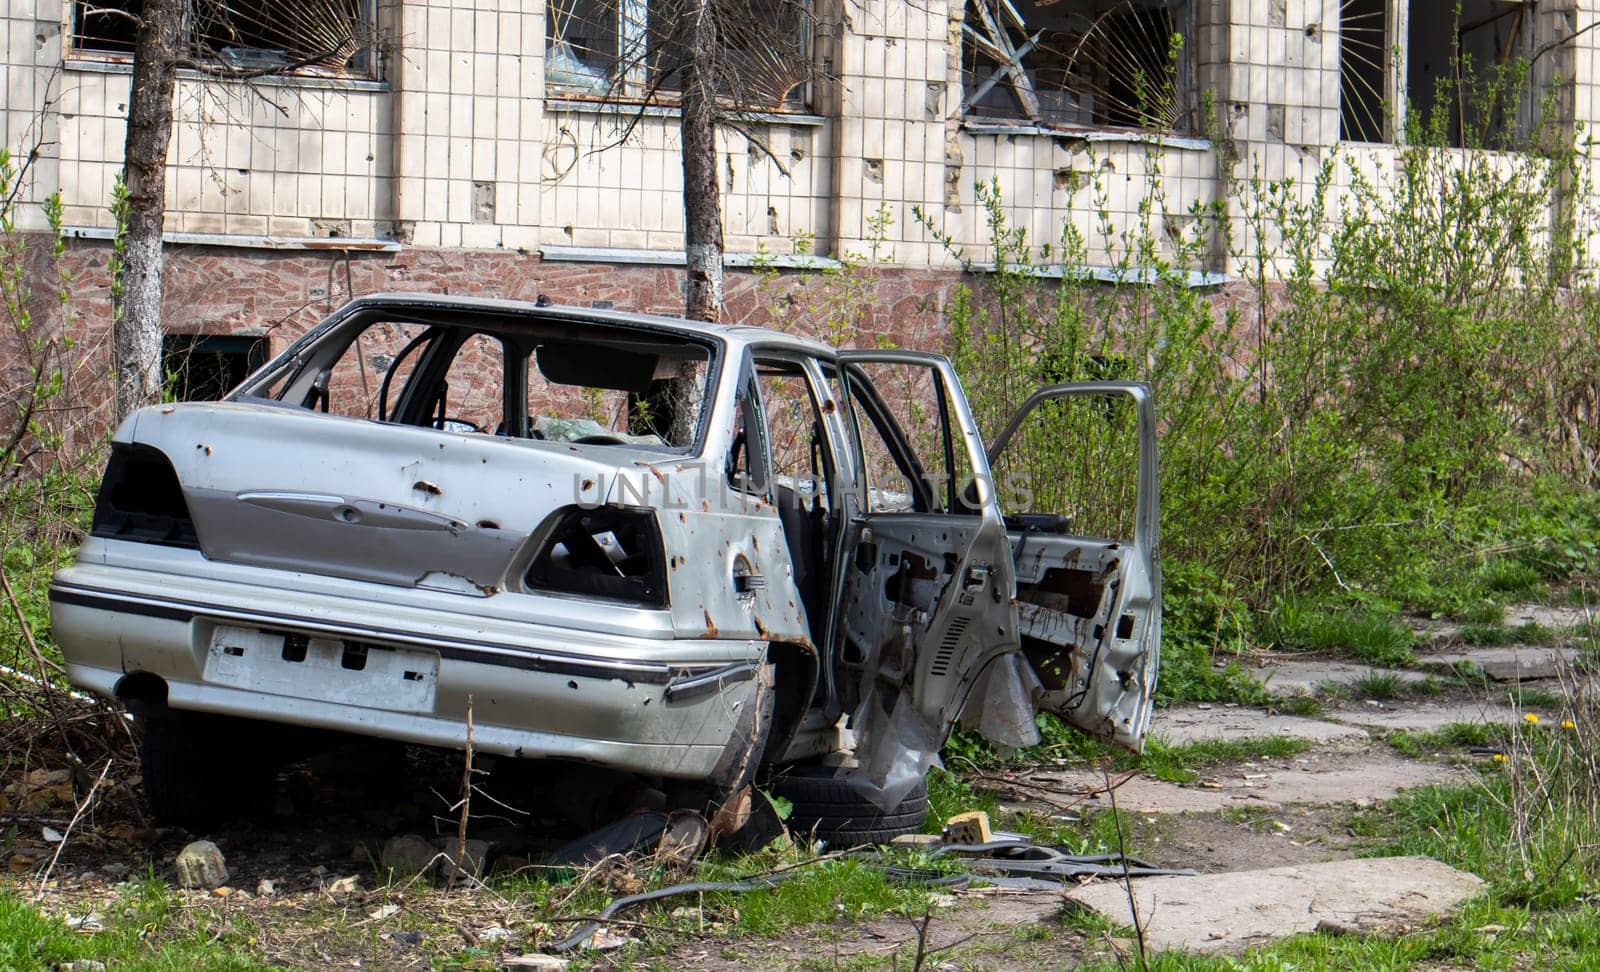 A broken car, shot by artillery, stands in the courtyard of a multi-storey residential building. War between Russia and Ukraine. The wreckage of an abandoned car